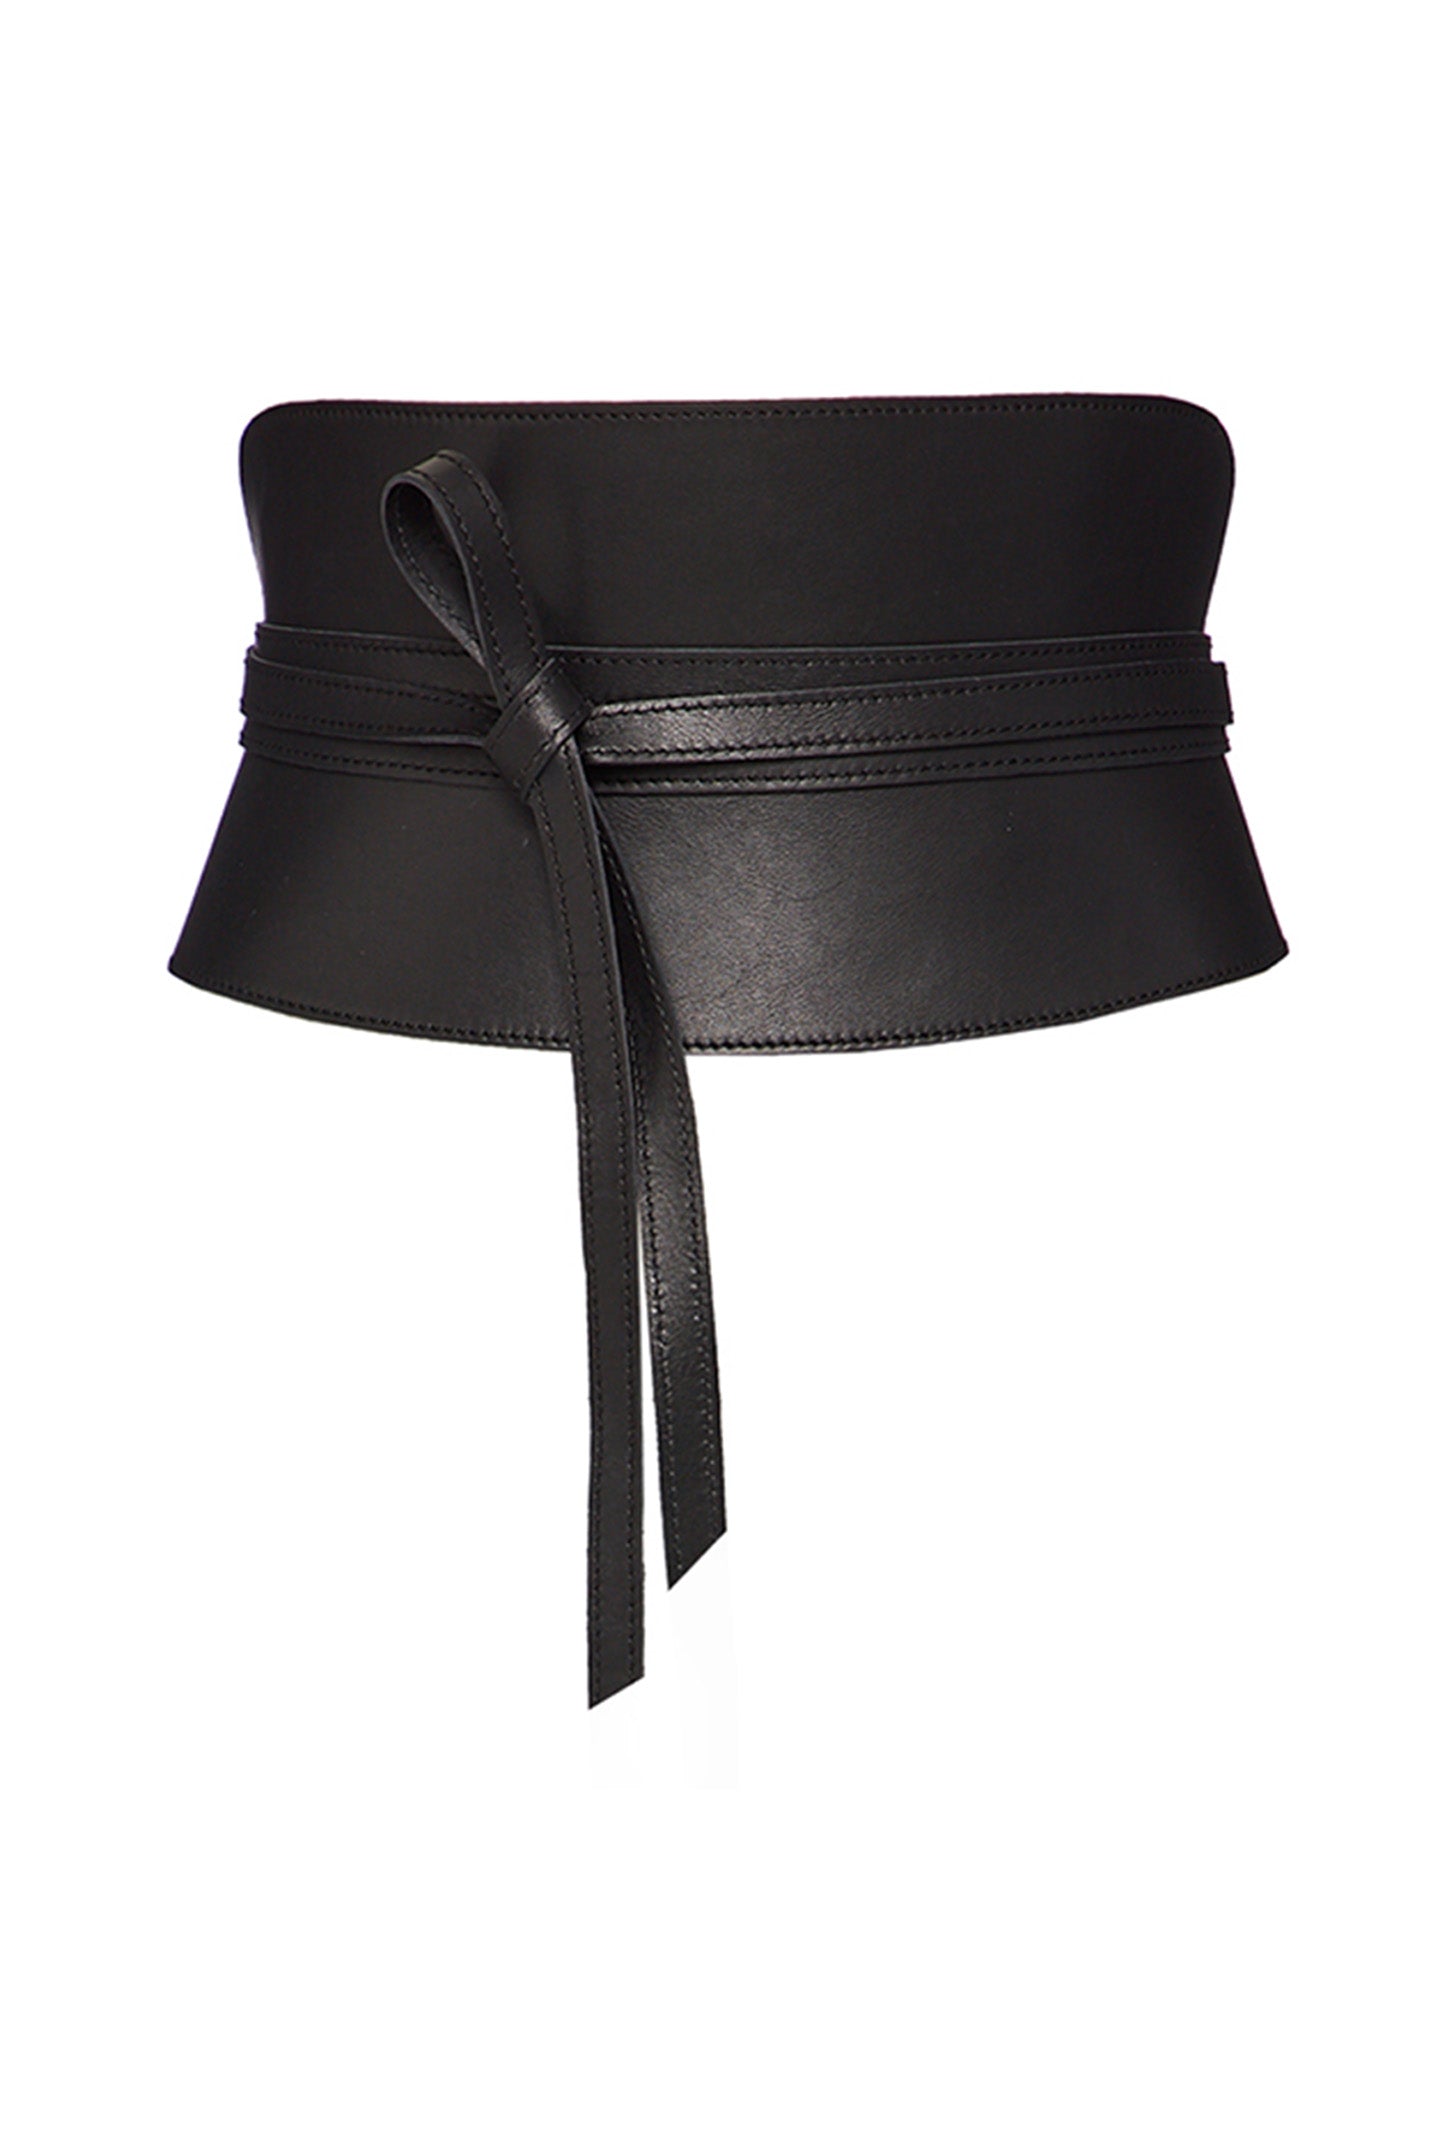 Corset belt - Pitch Black | Leather accessories by PRITCH